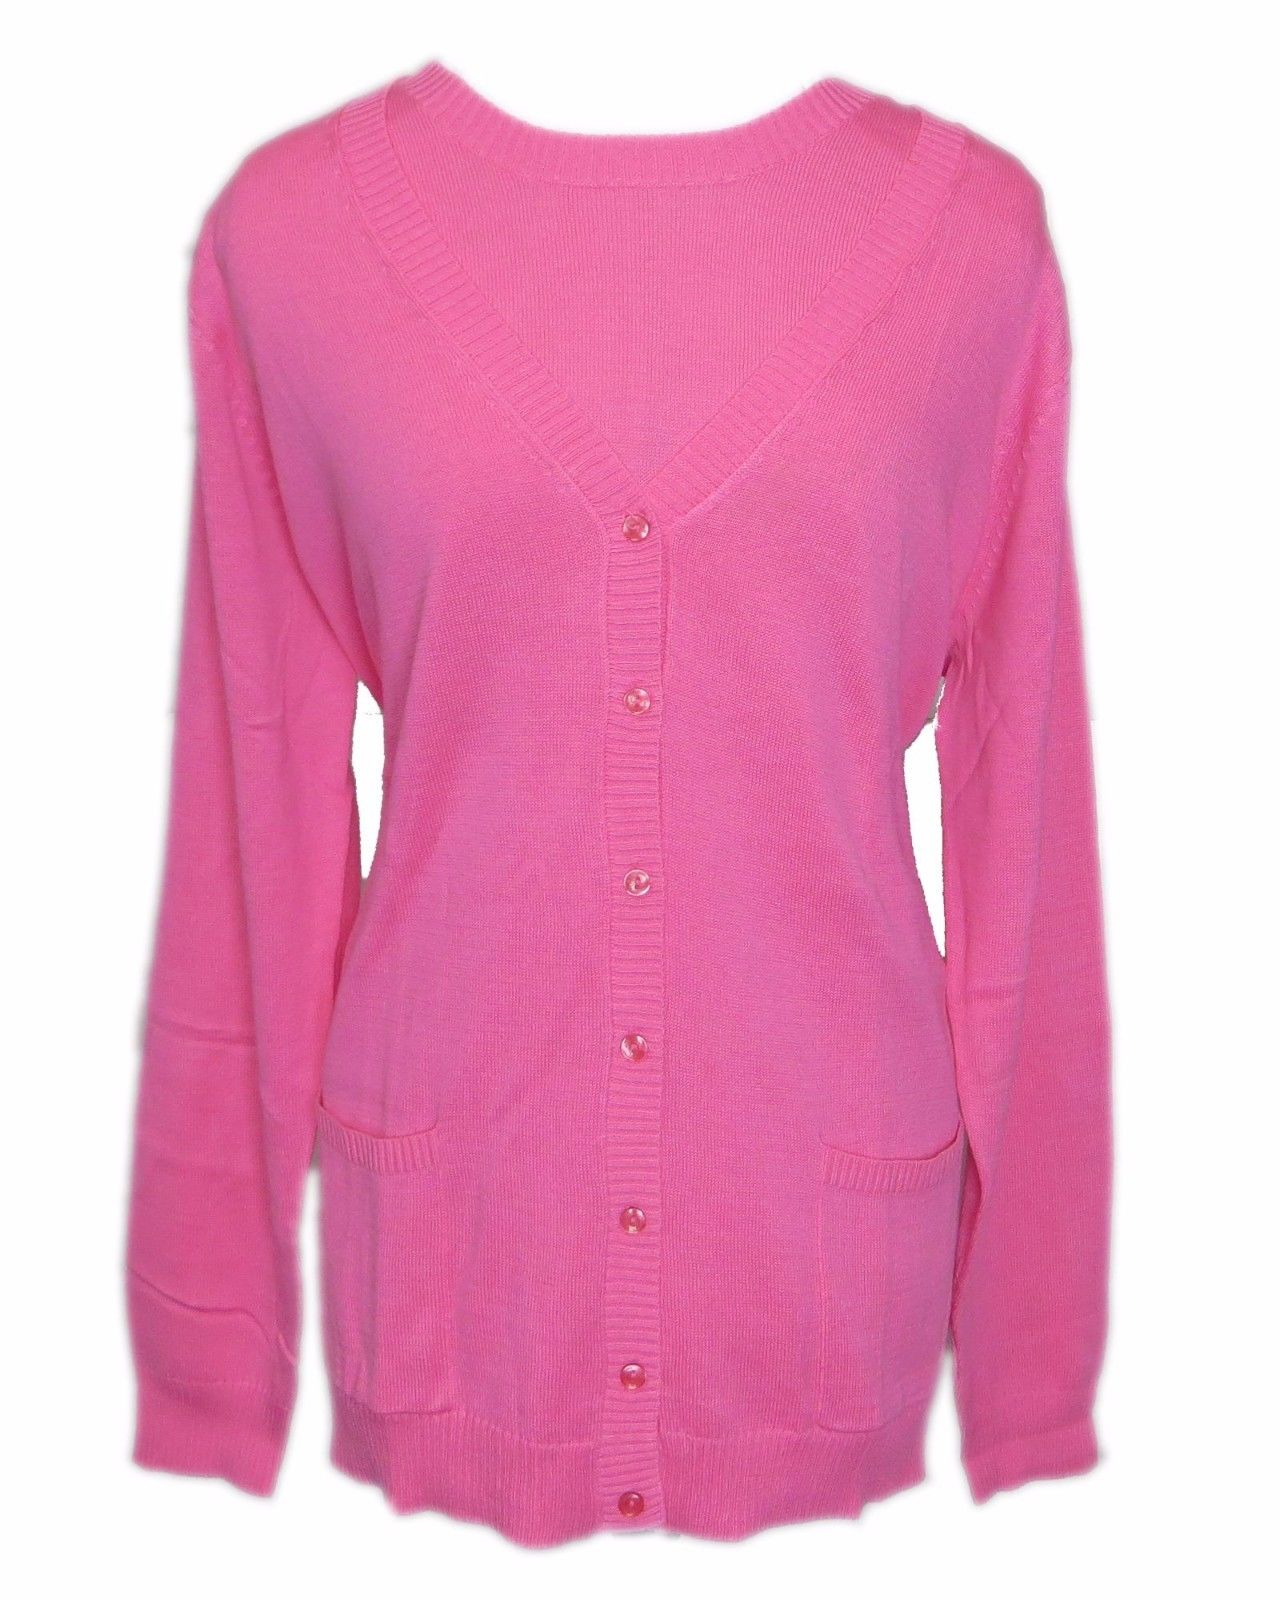 Size M Denim & Co. Sweater Set in Pink